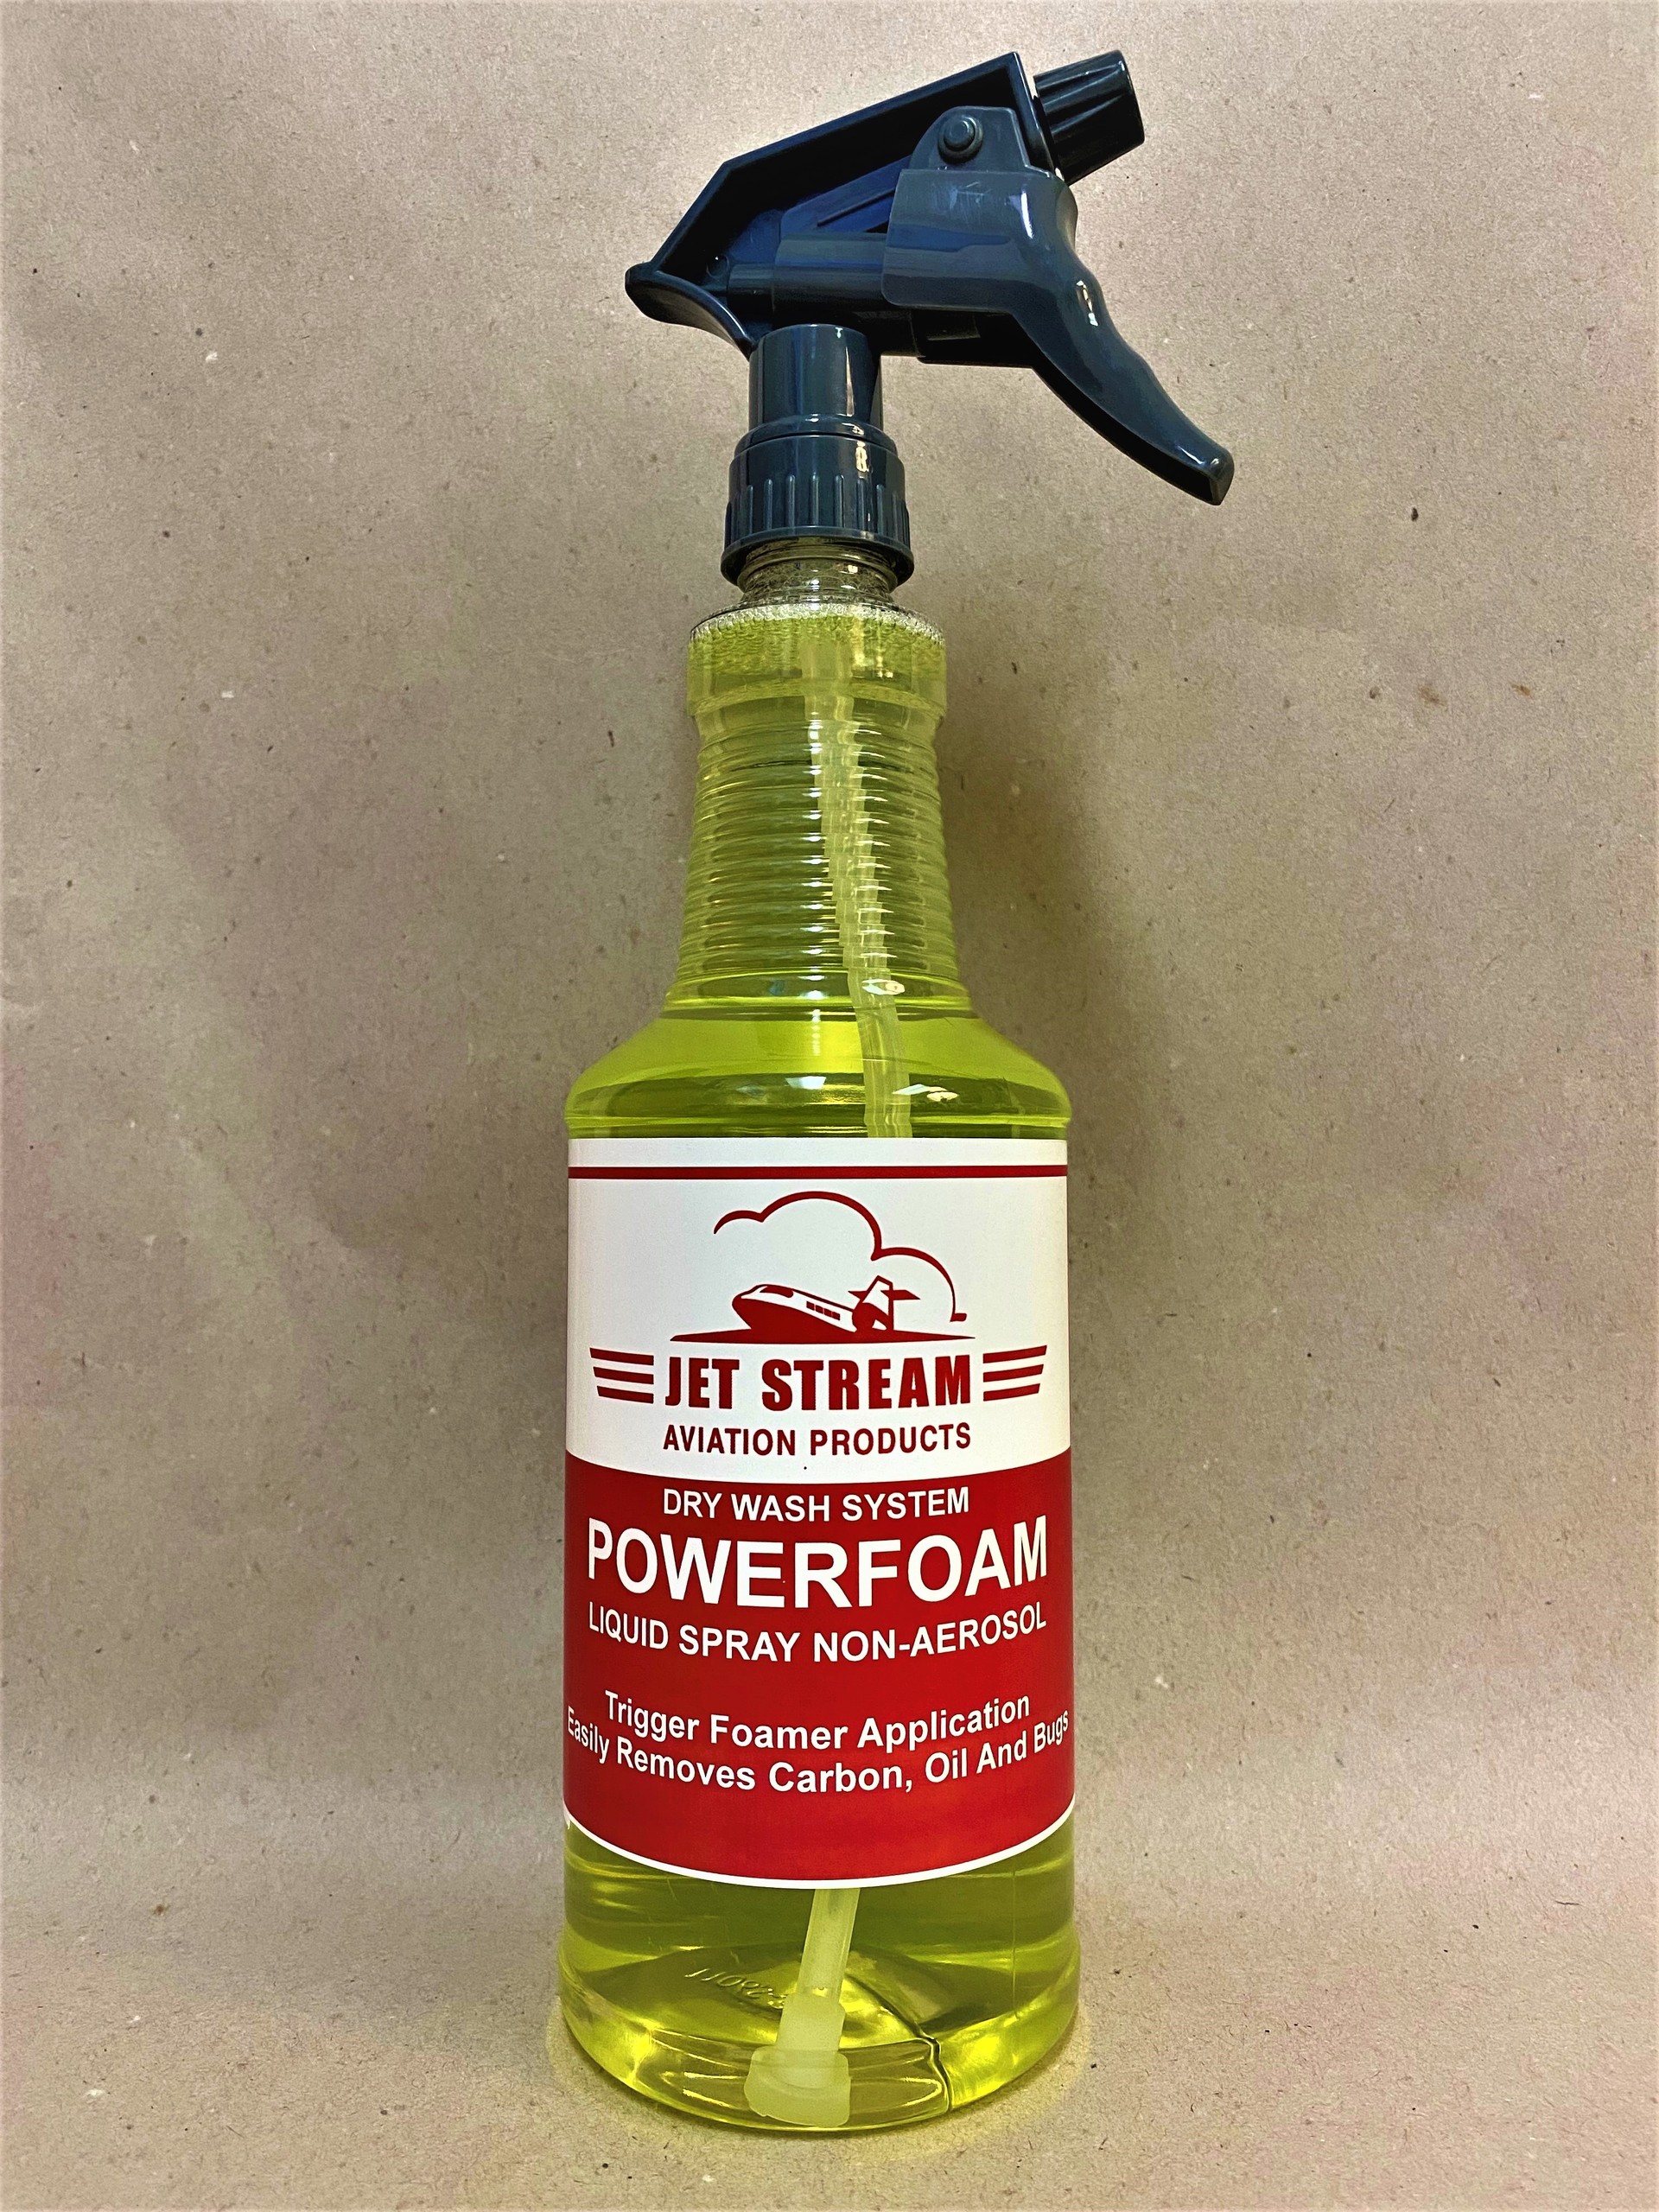 Jet Stream Aviation Products - Dry Wash System